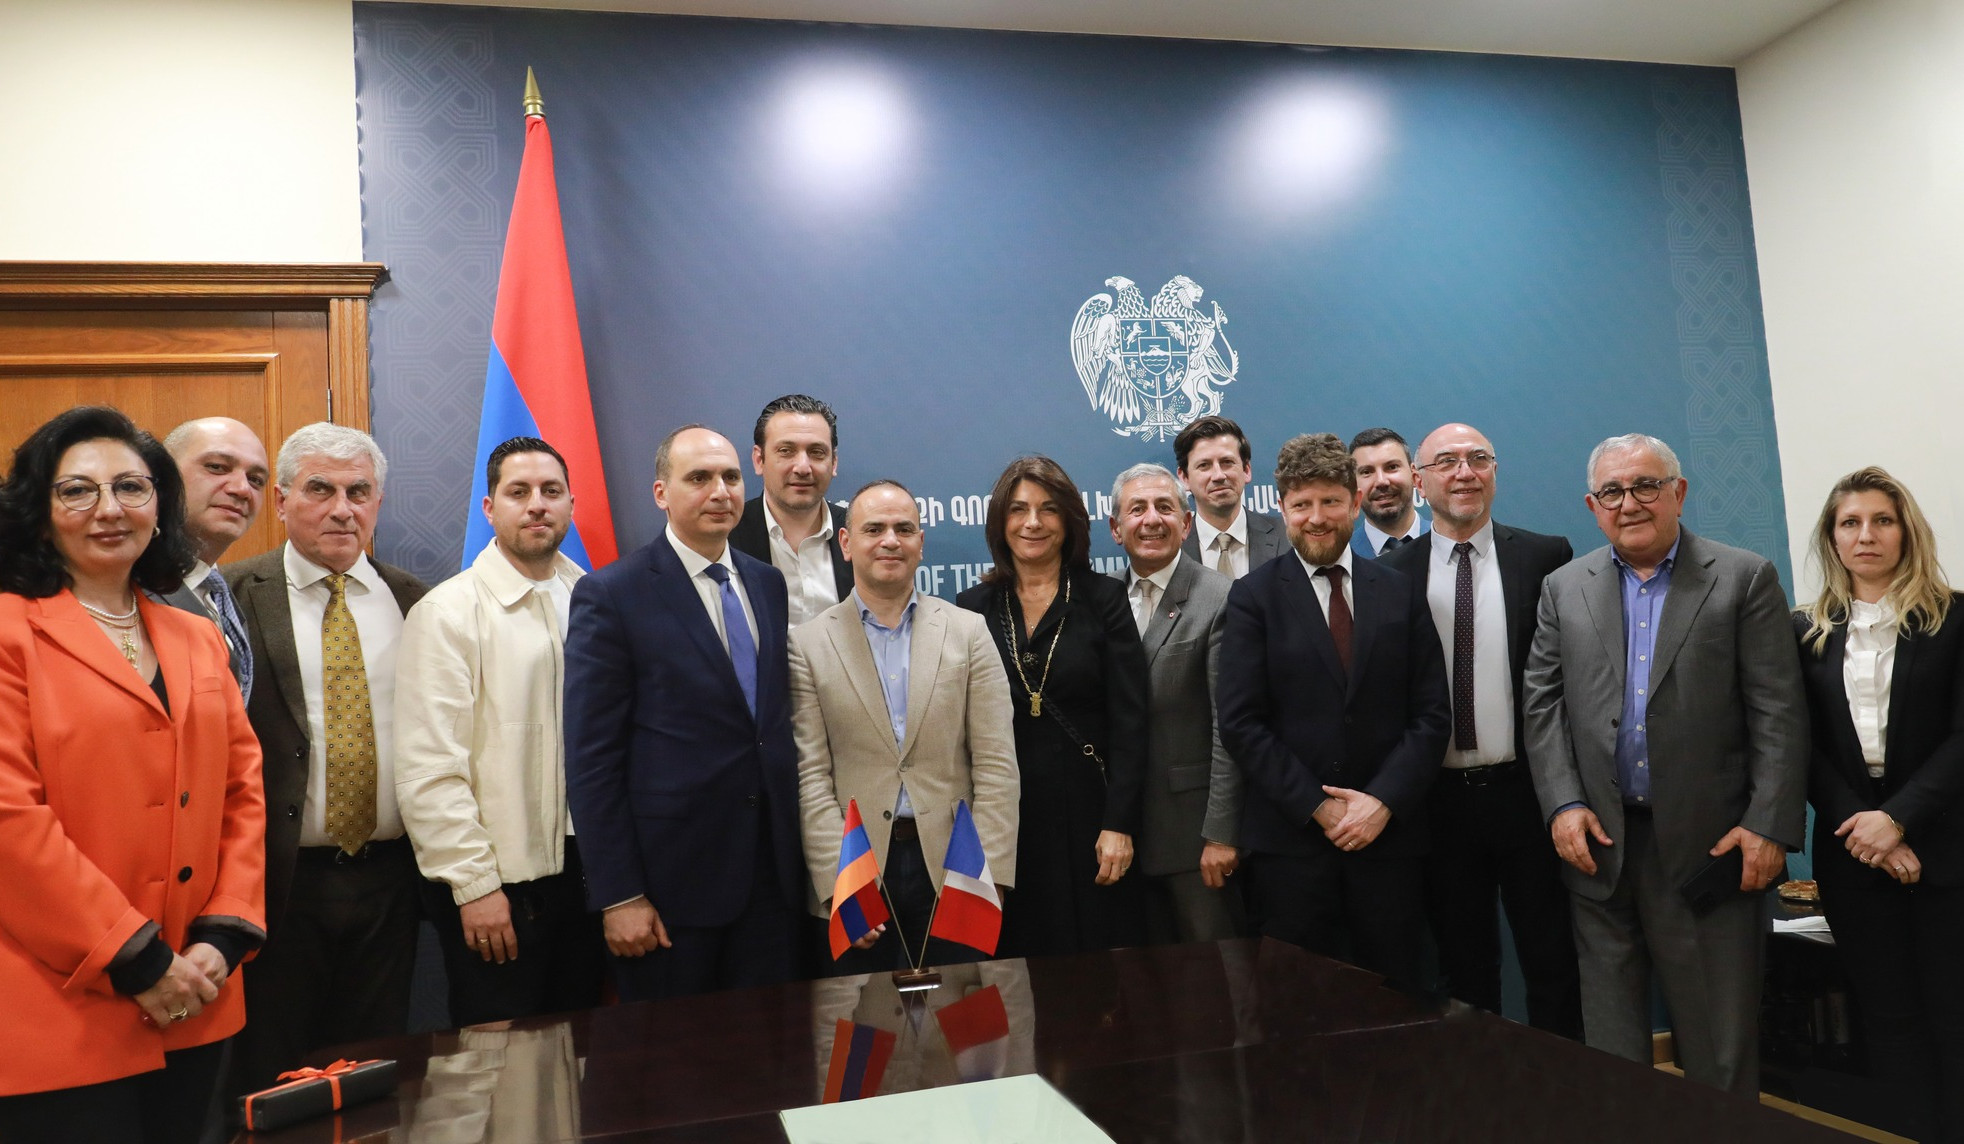 Department of Bouches-du-Rhône is very interested in development of investment, humanitarian relations with Armenia: Martine Vassal